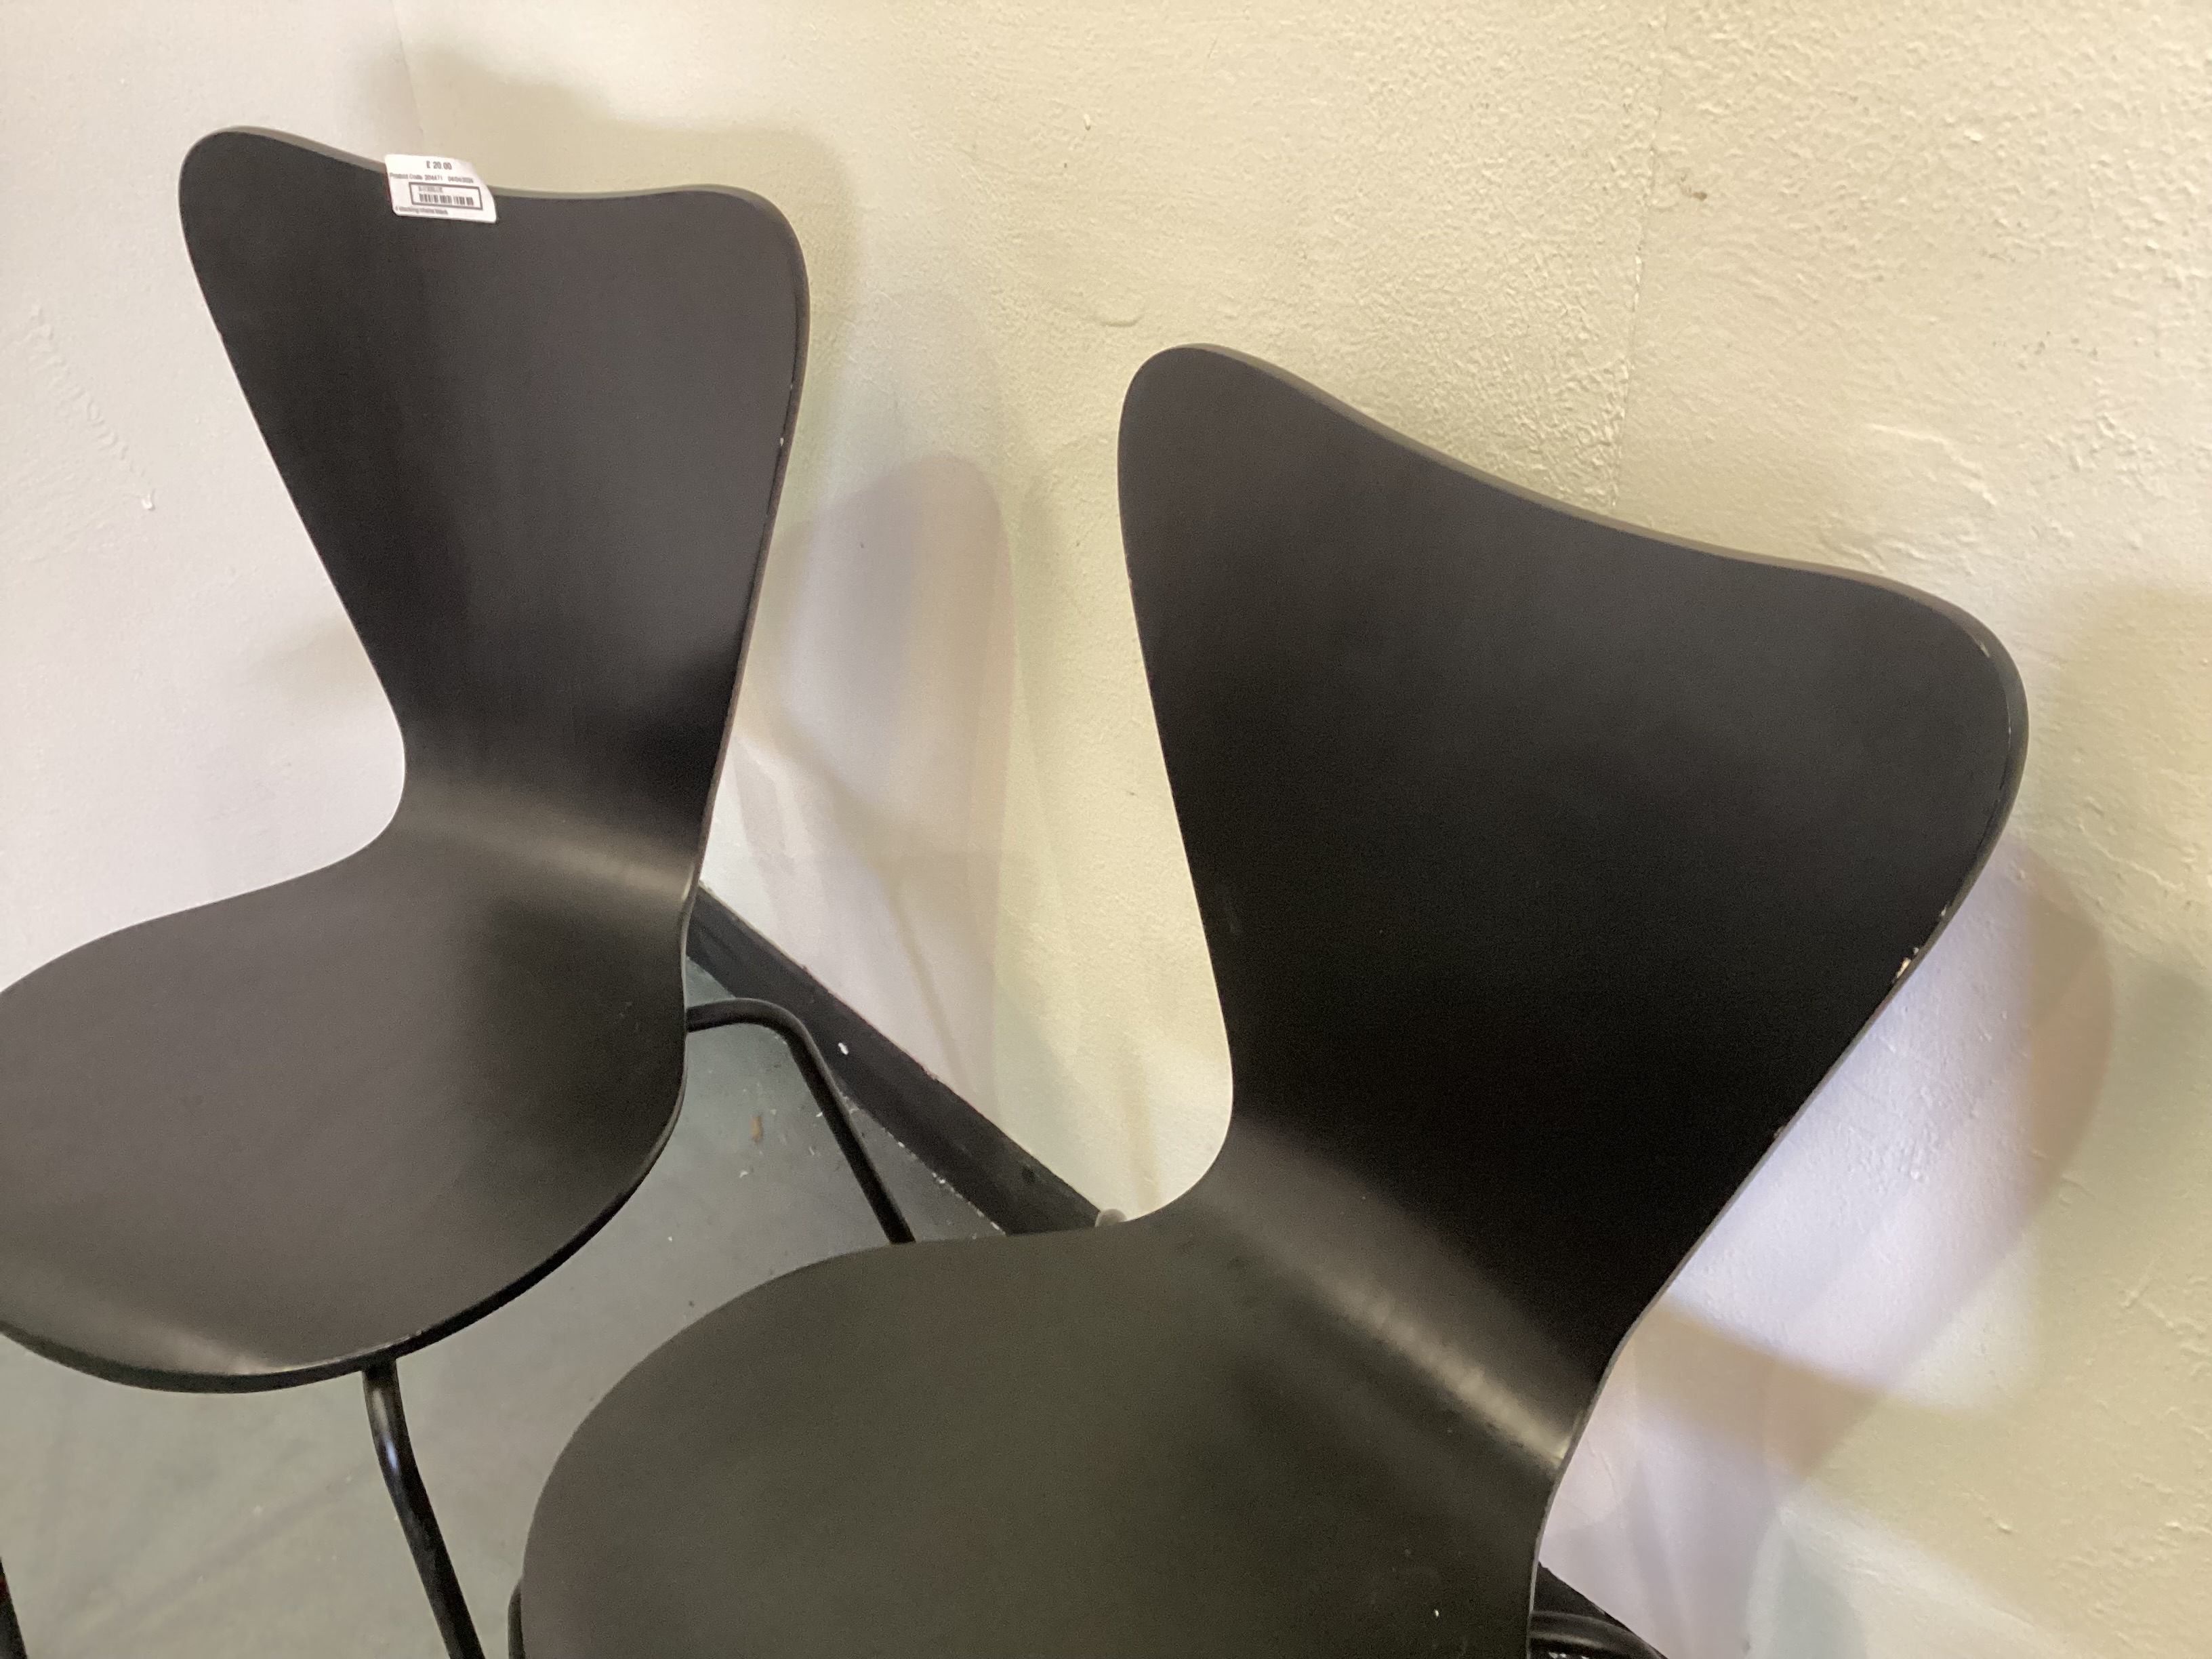 4 stacking chairs black